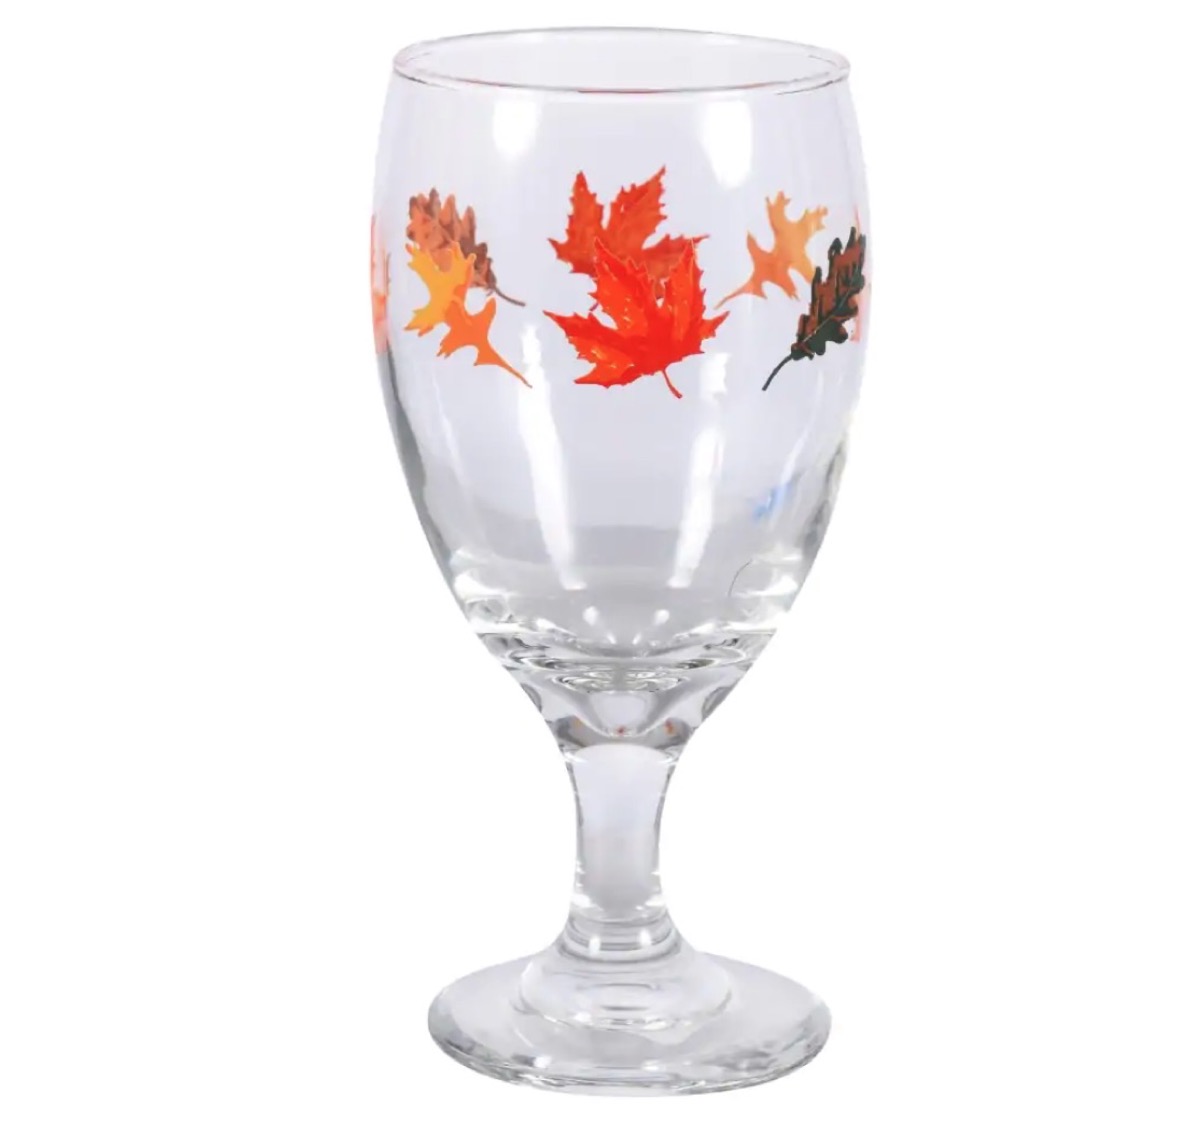 plastic wine glass with leaves on it, dollar store fall decor